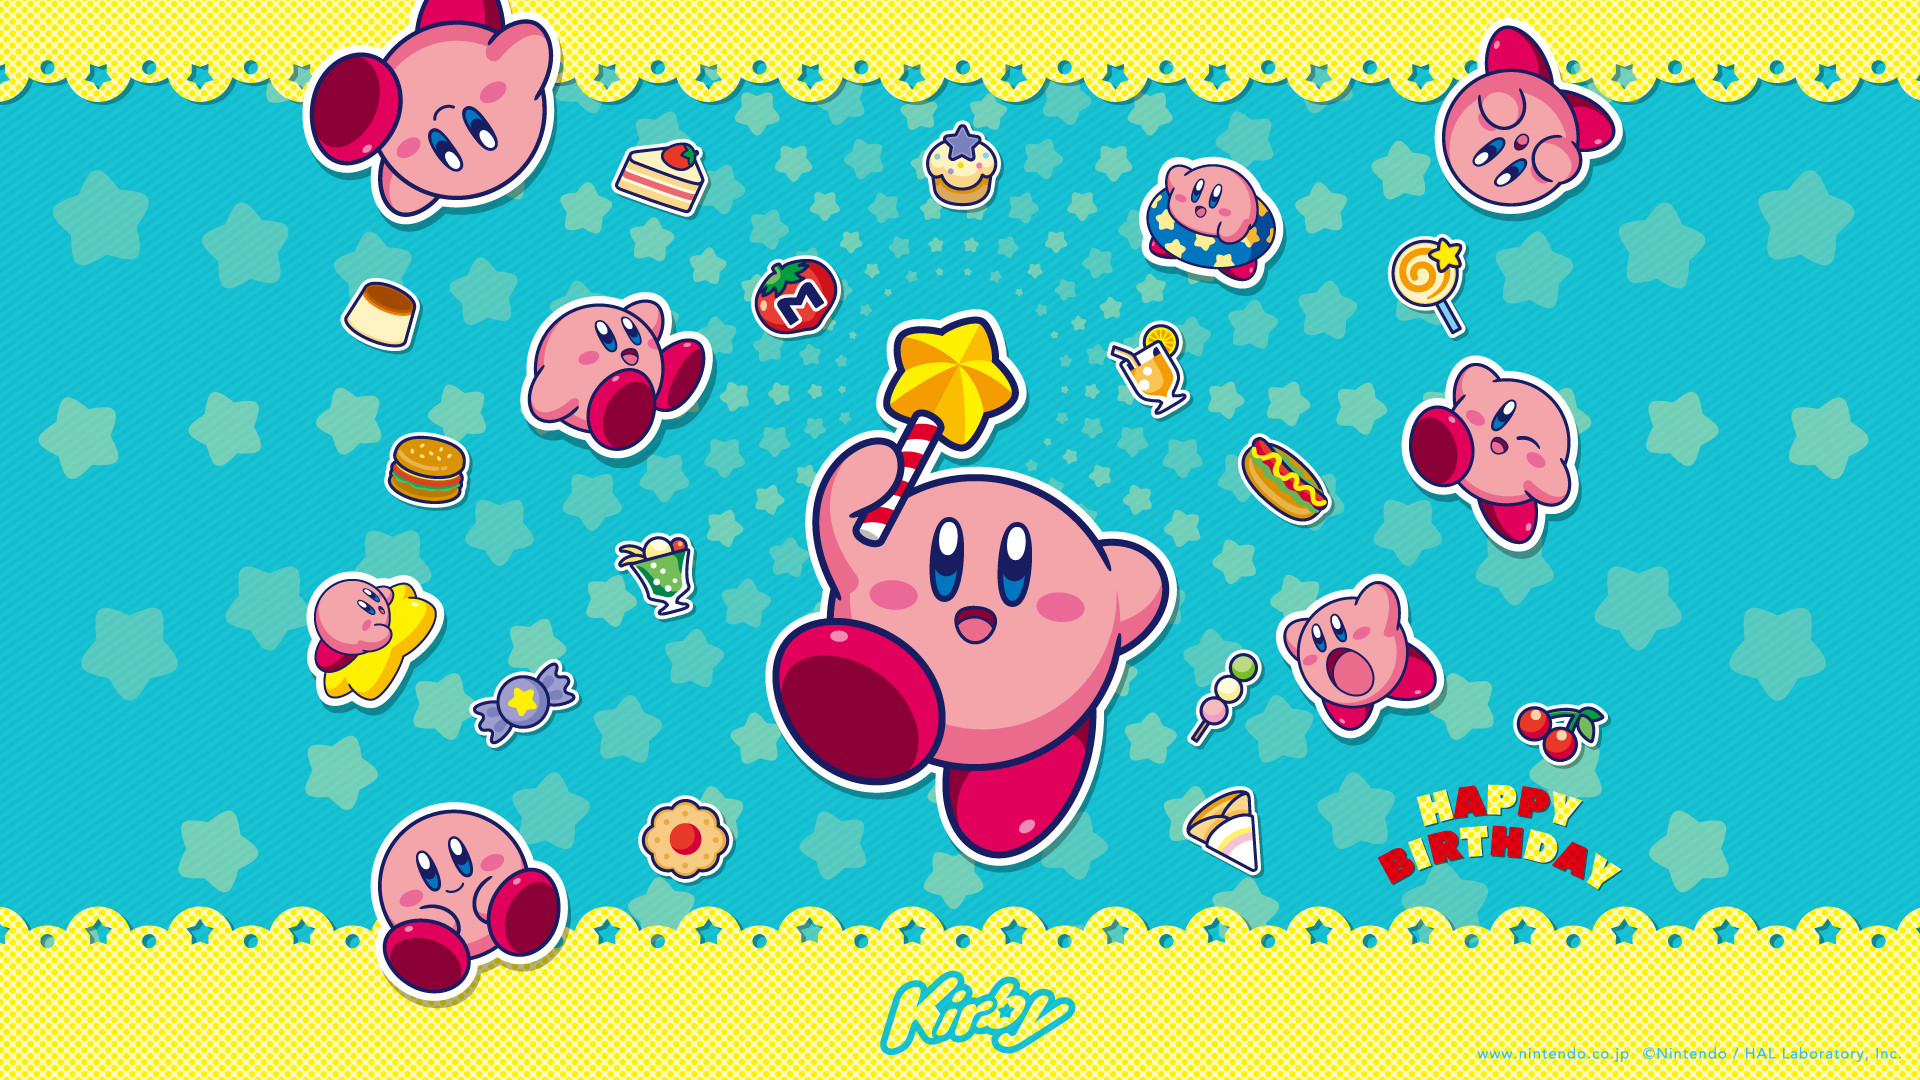 1920x1080 Kirby "Happy Birthday" official wallpaper available